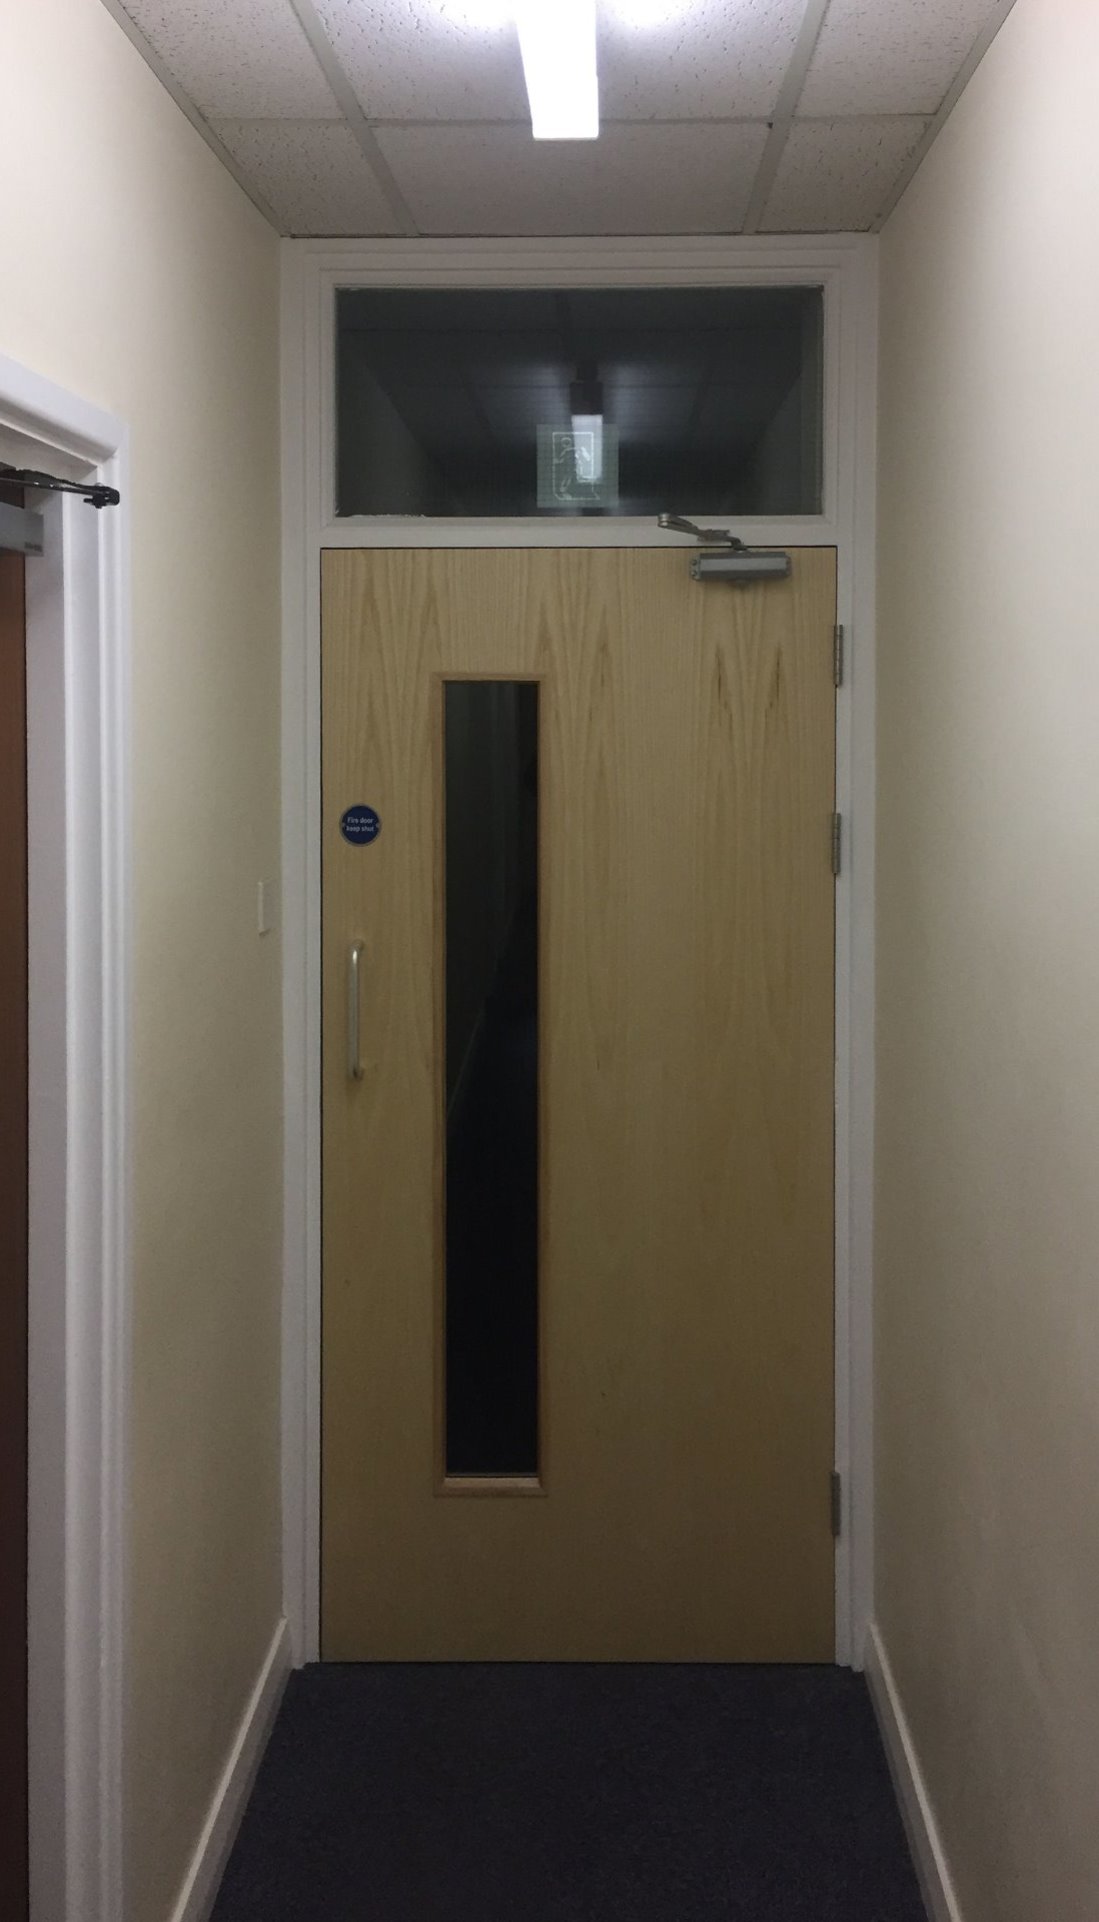 All doors installed to current regulations, improving the safety aspect of the door and the aesthetic value of the doors modernized the corridor in North Devon